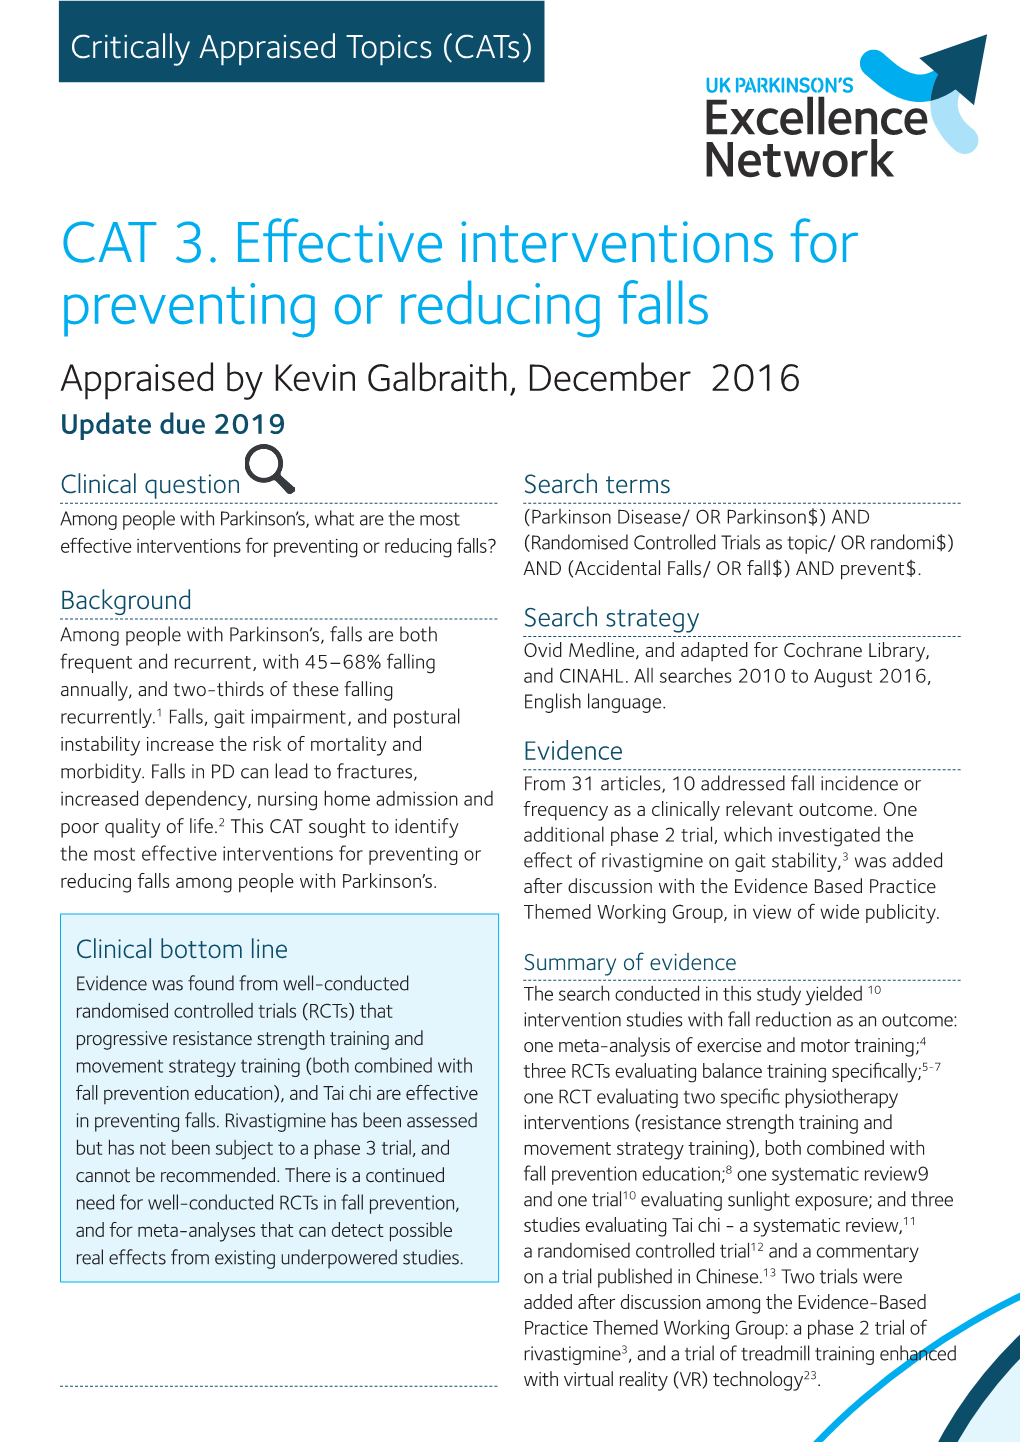 CAT 3. Effective Interventions for Preventing Or Reducing Falls Appraised by Kevin Galbraith, December 2016 Update Due 2019